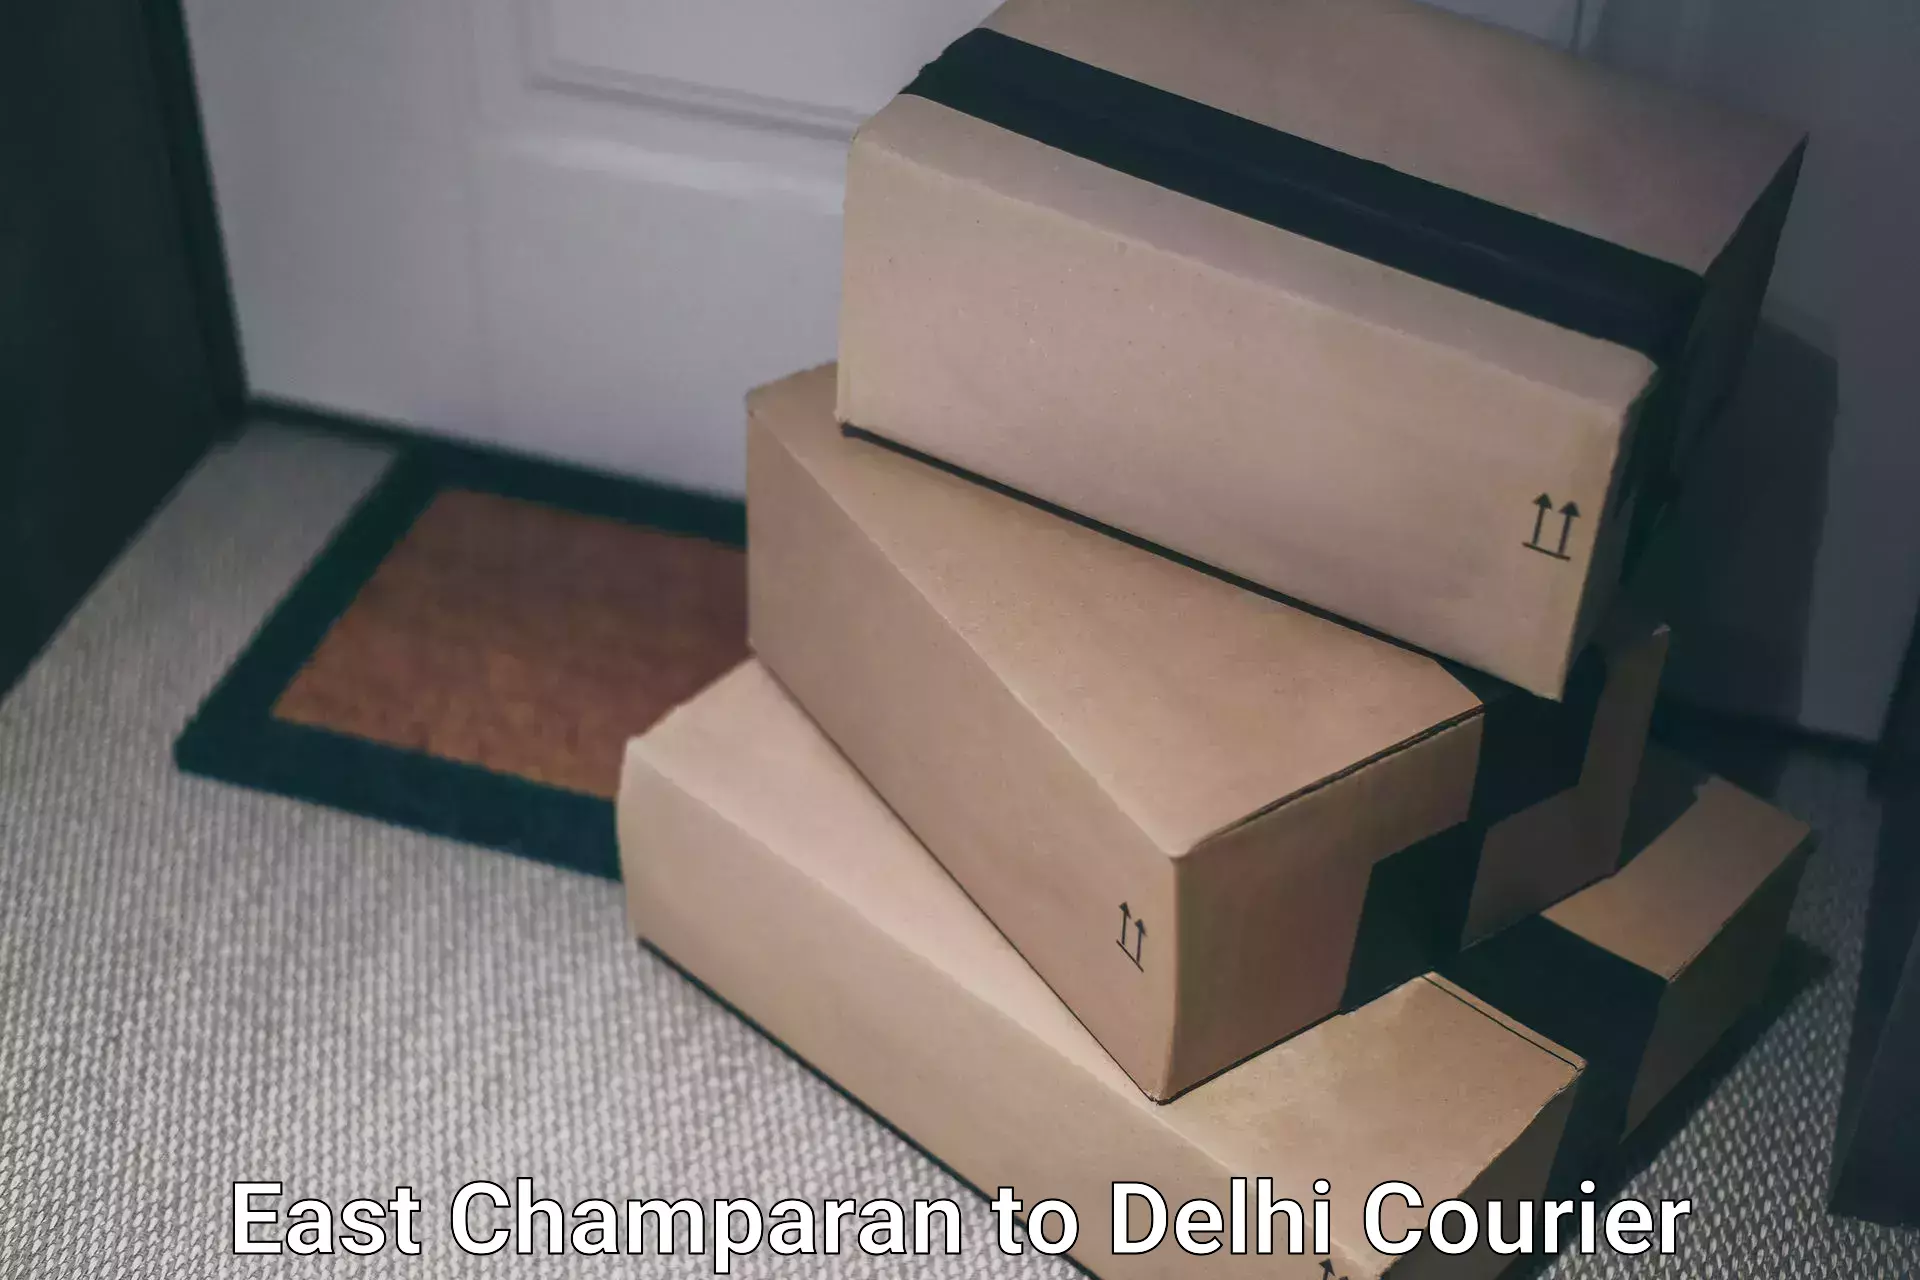 Speedy delivery service East Champaran to Indraprastha